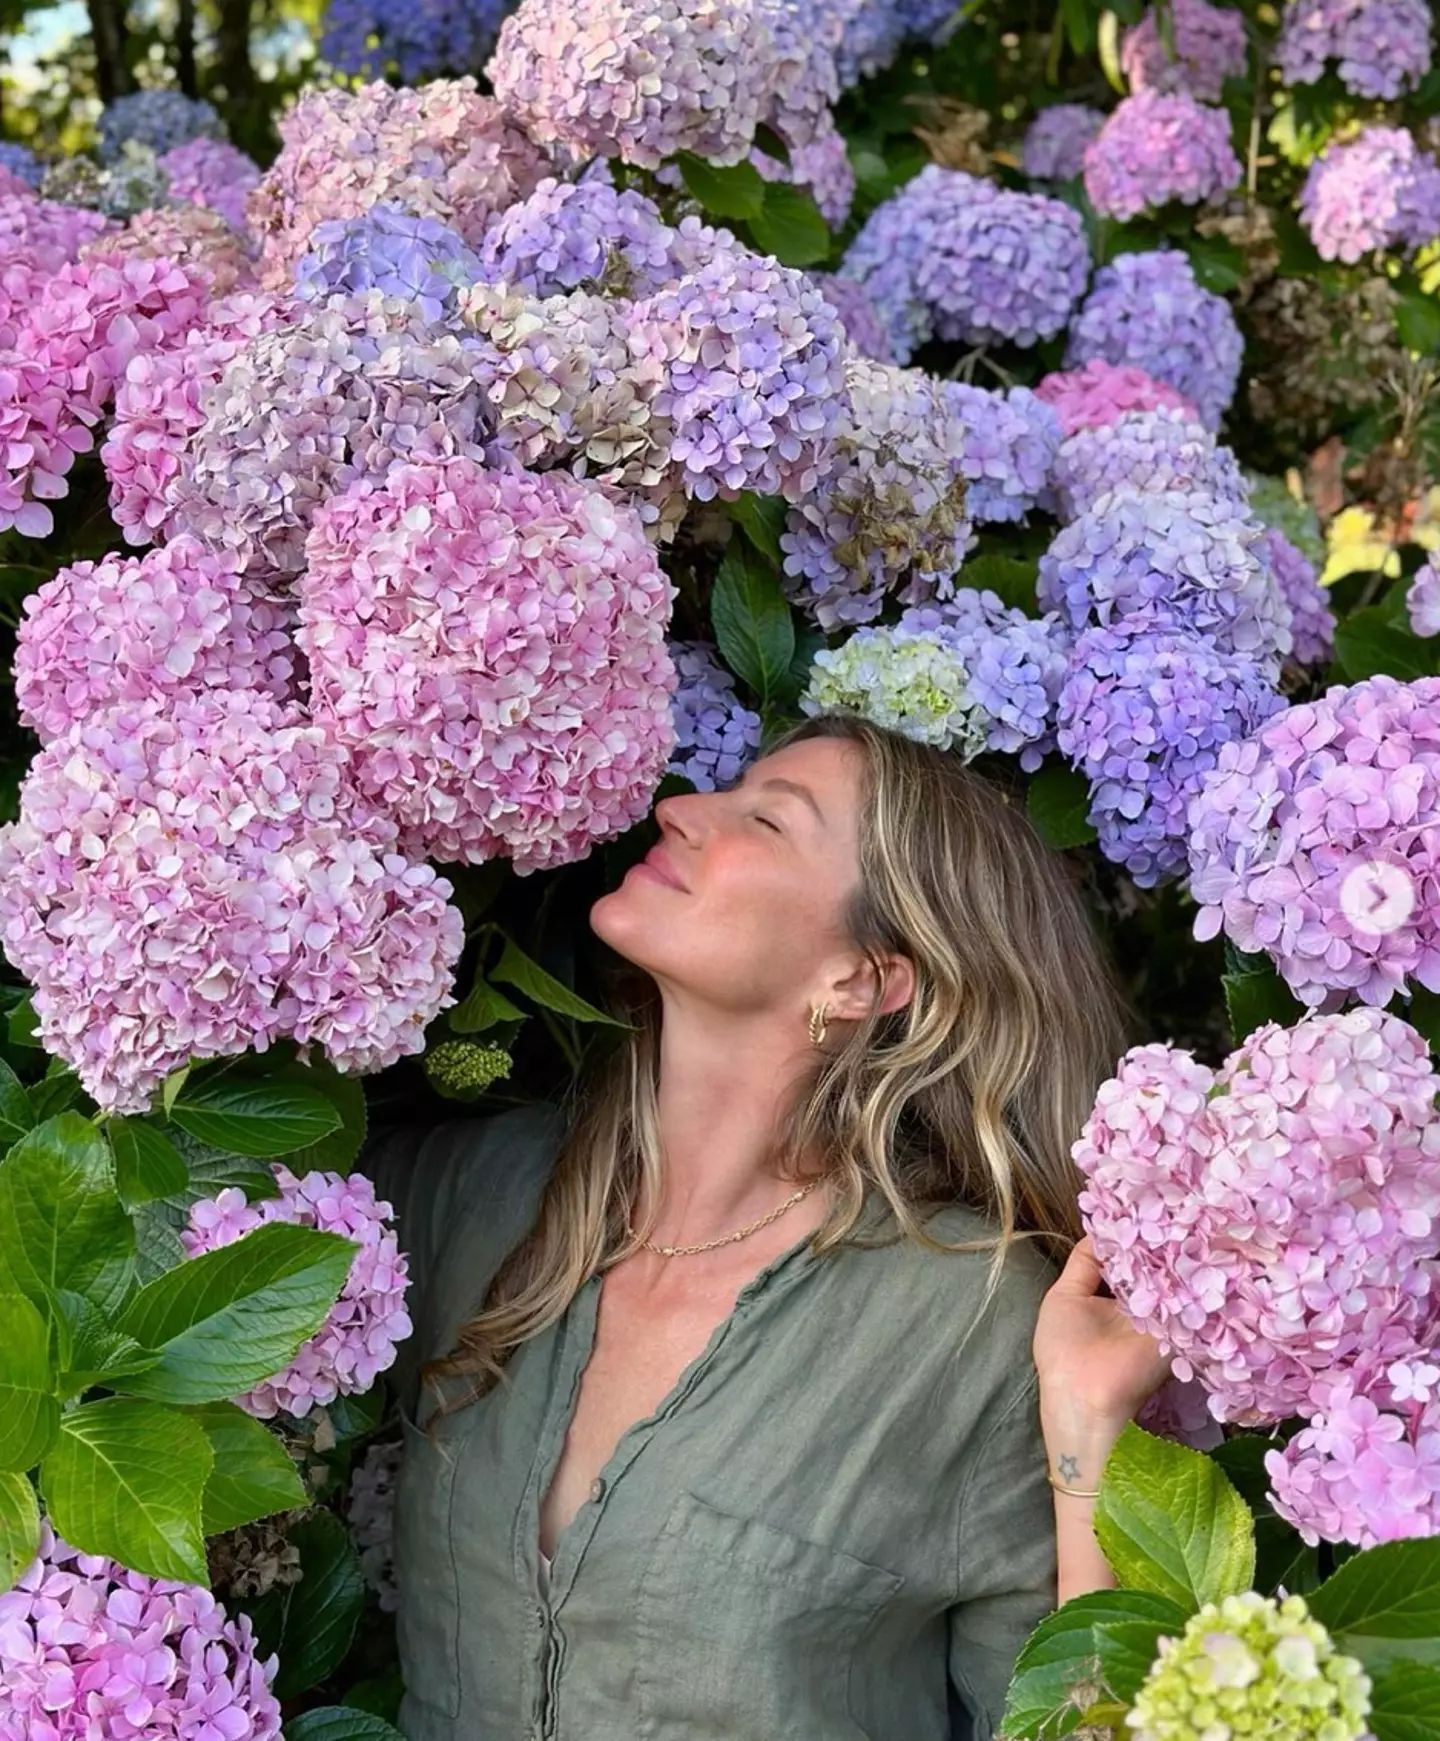 Supermodel Gisele Bündchen has spoken about the crypto brand for the first time.